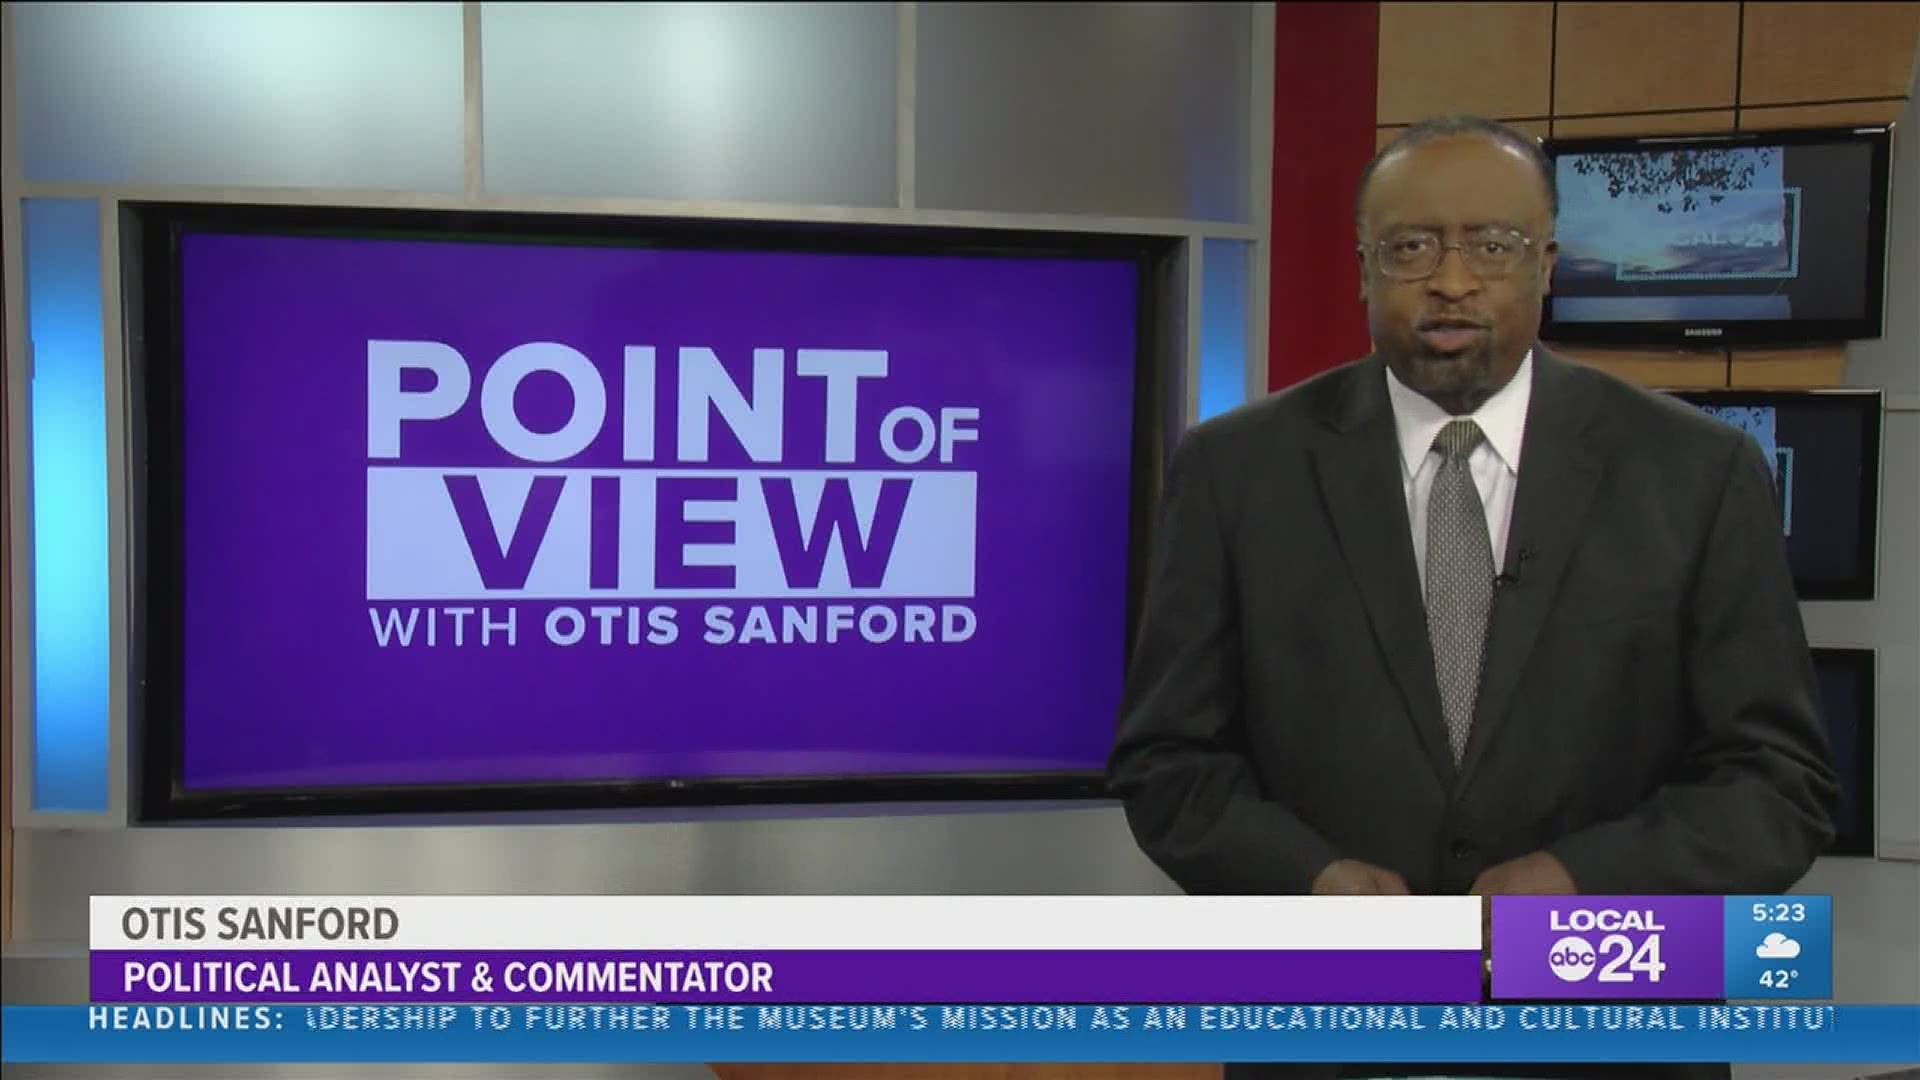 Local 24 News political analyst and commentator Otis Sanford shares his point of view on the COVID-19 “superspreader” party this past weekend in Memphis.